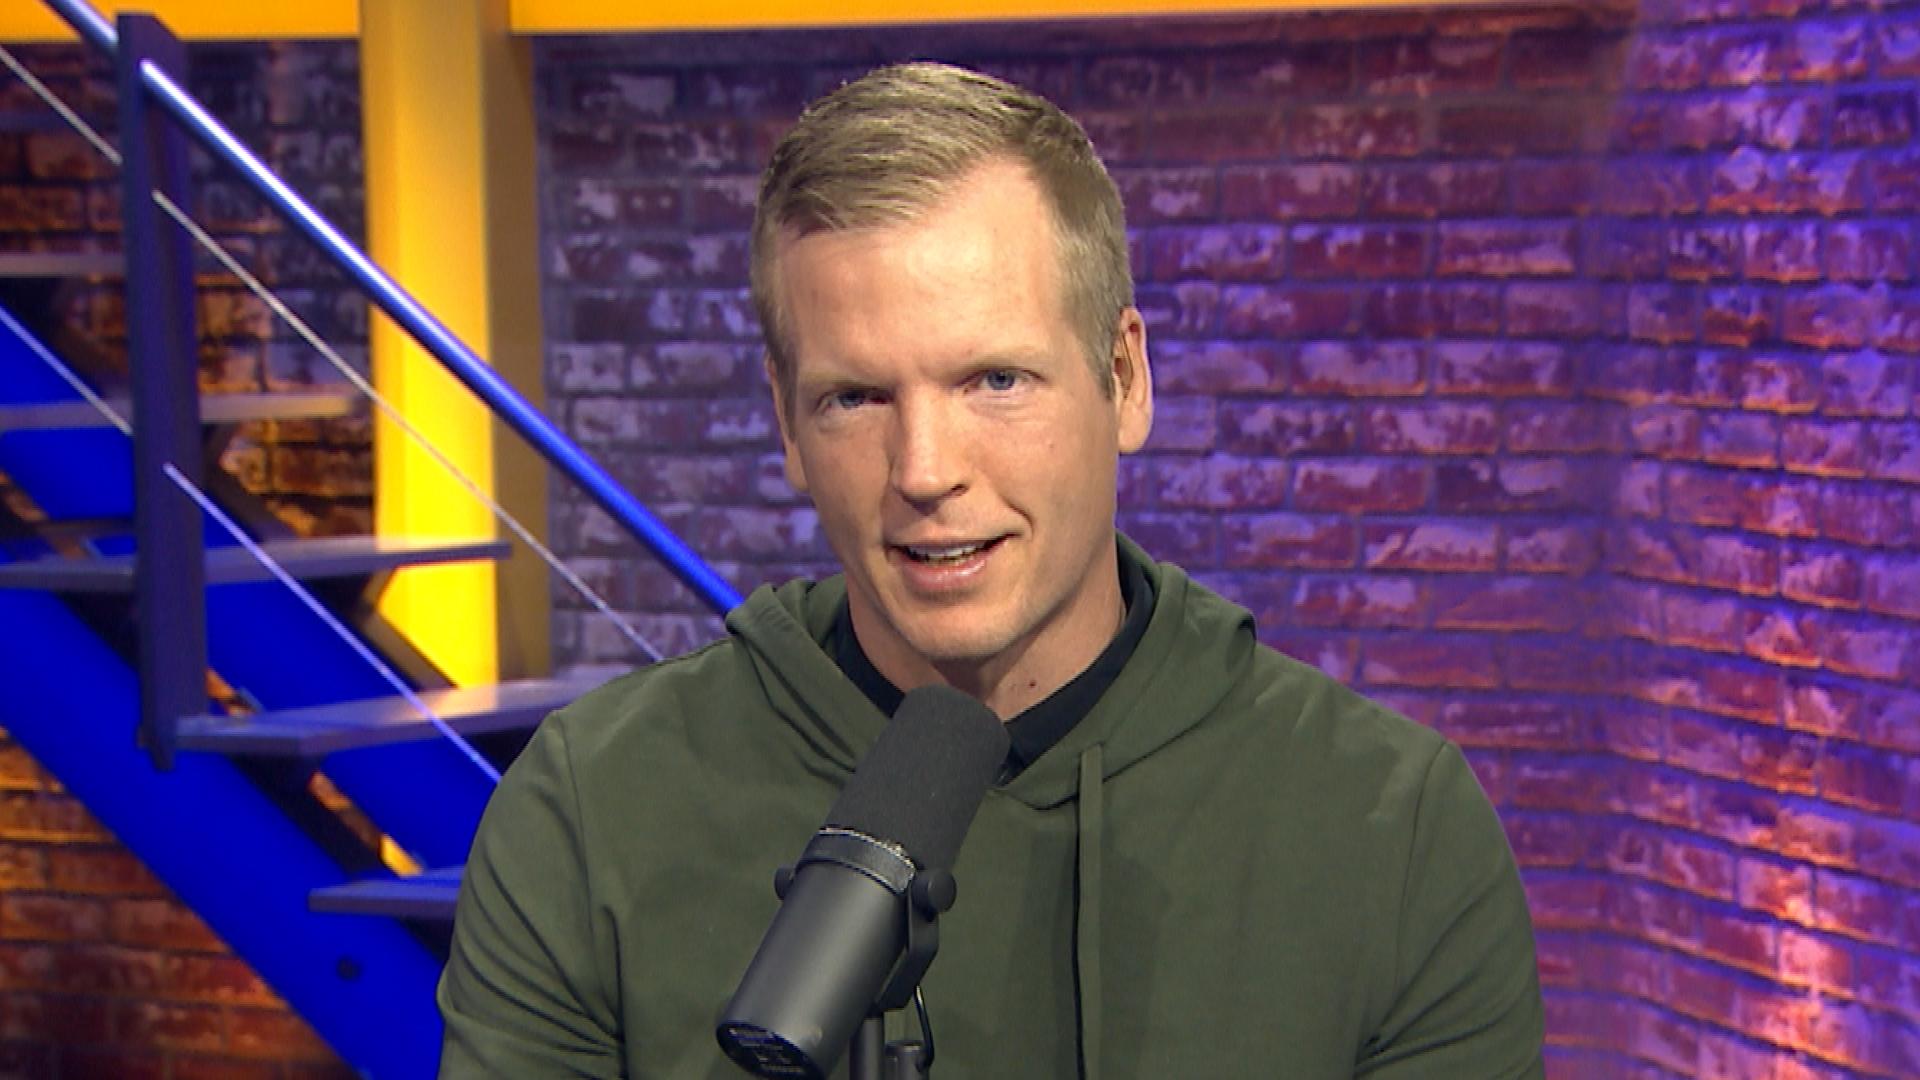 How Is American Sports Analyst Chris Simms And Phil Simms Related? Details About Their Age Difference And Net Worth 2022